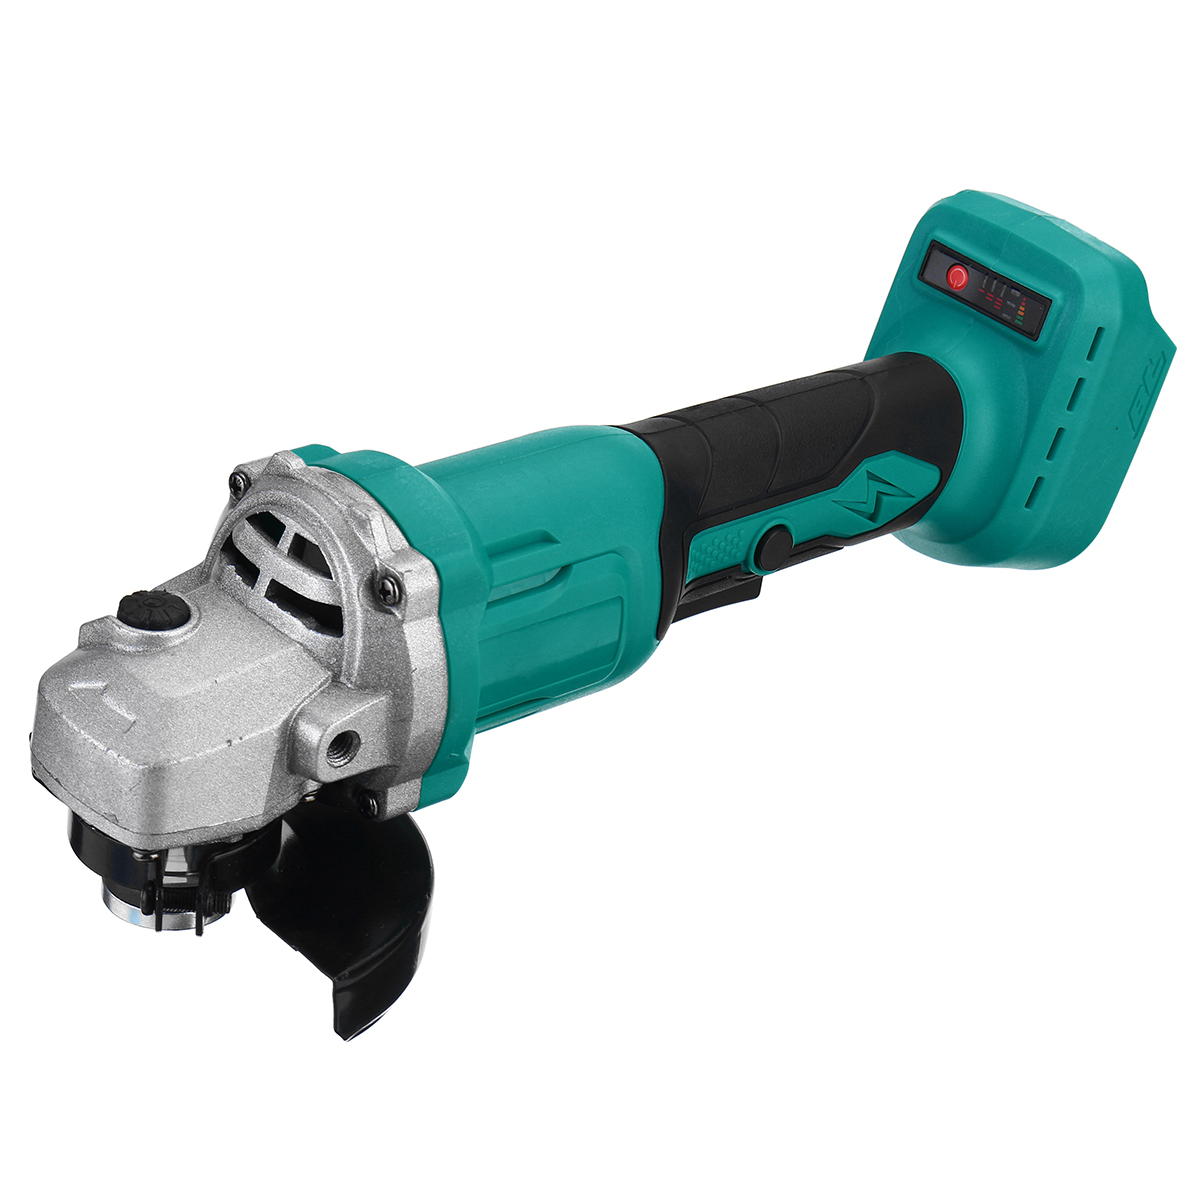 100mm-Brushless-Electric-Angle-Grinder-Grinding-Machine-Cordless-DIY-Woodworking-Power-Tool-1764625-5